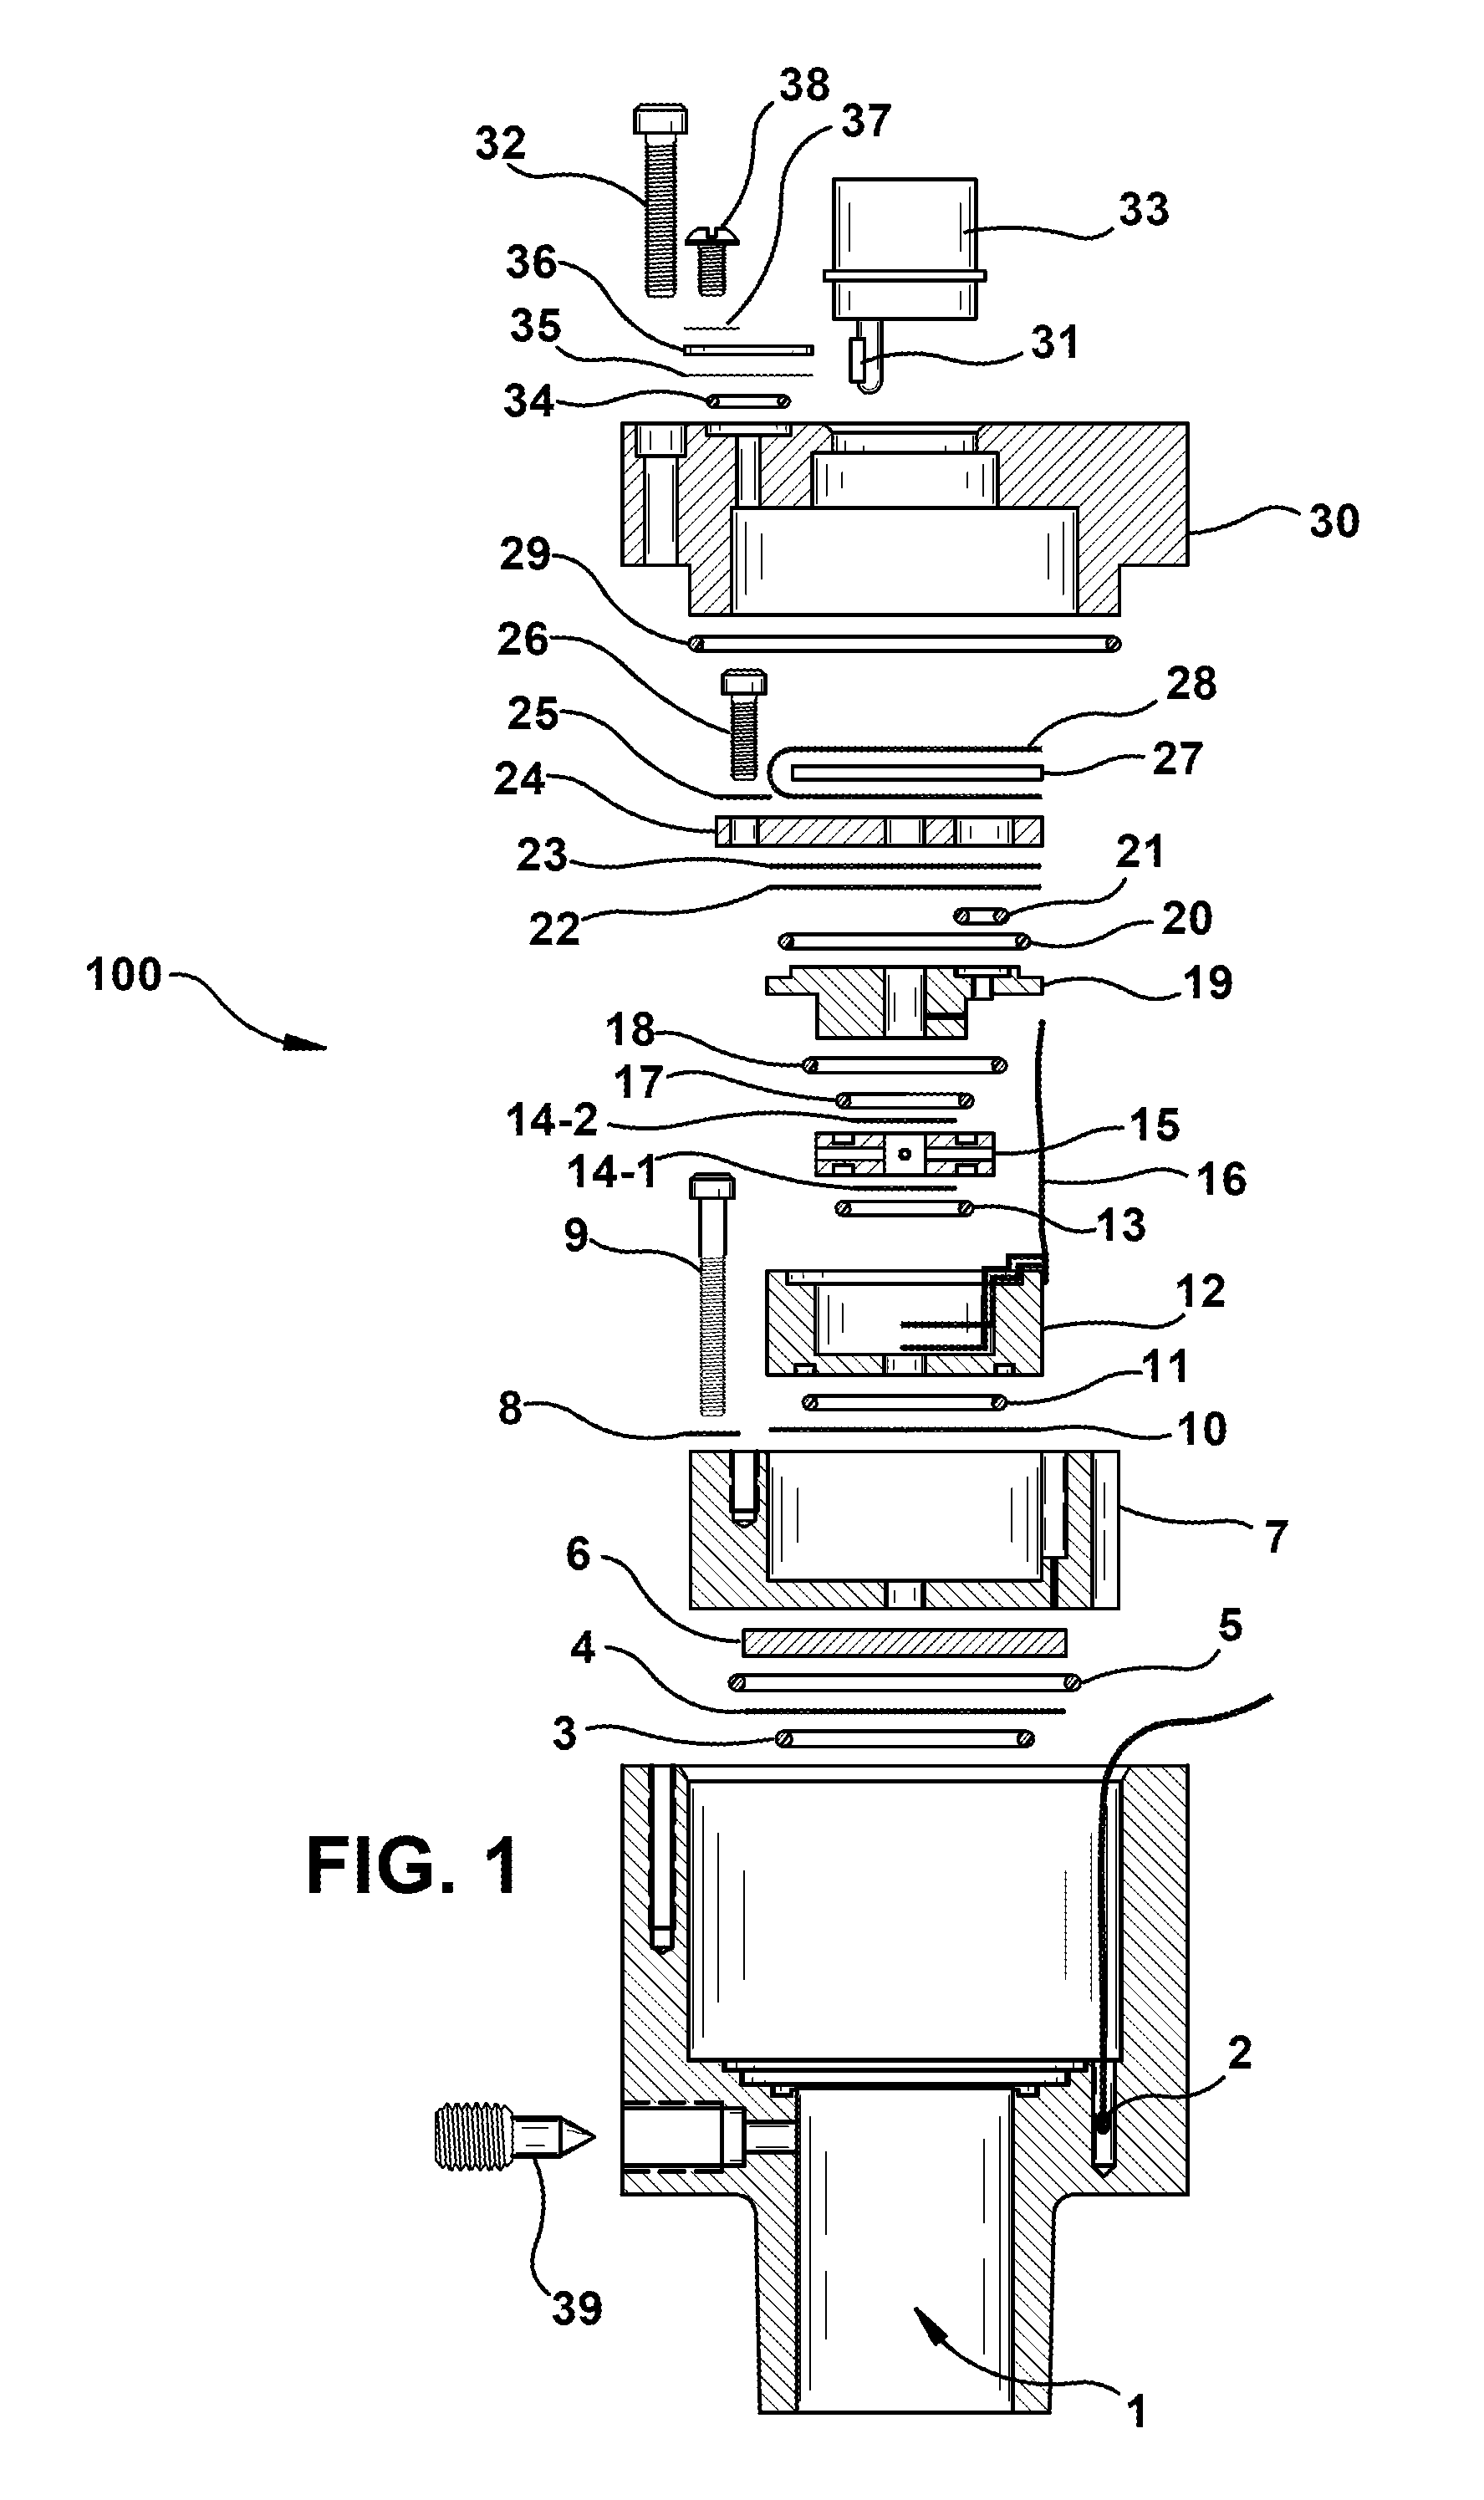 Sensor apparatus for measuring and detecting acetylene and hydrogen dissolved in a fluid